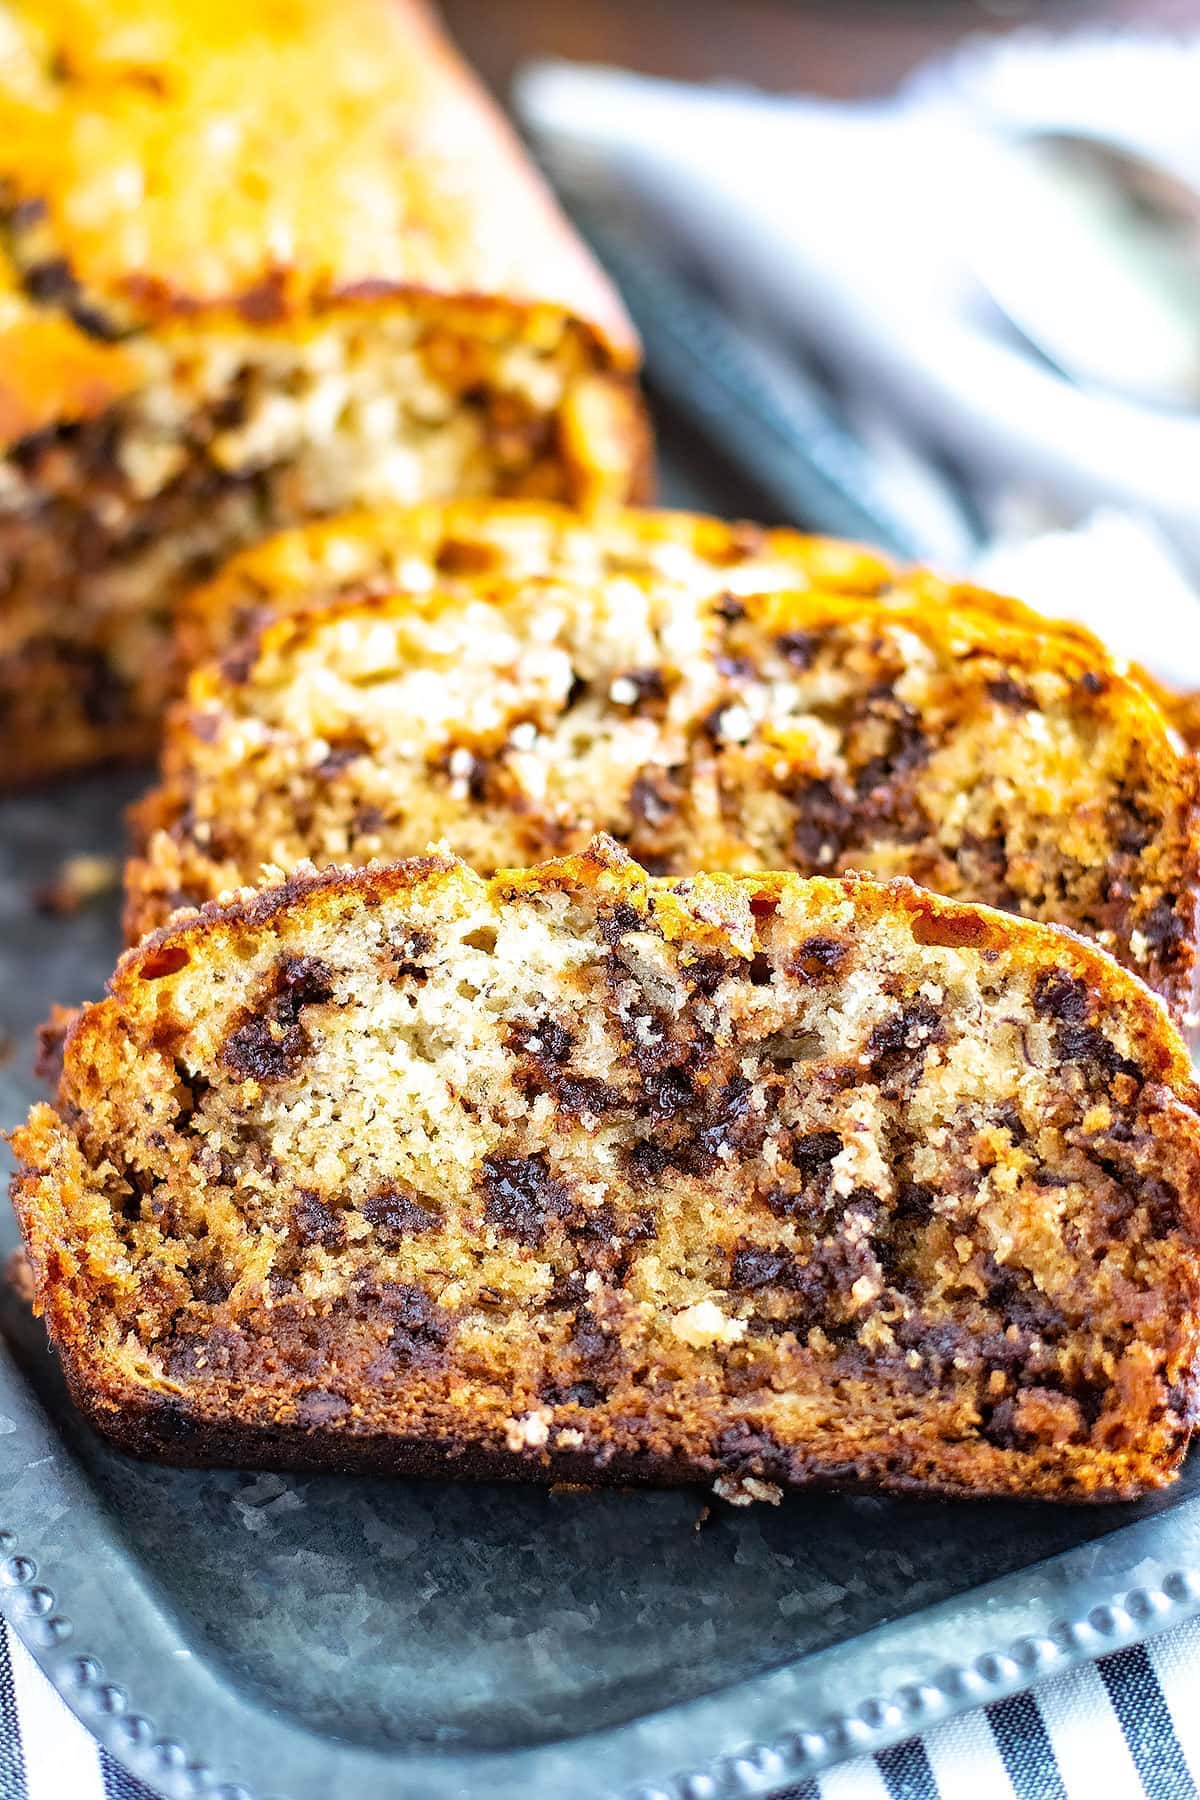 A close-up of chocolate chip banana bread slices.